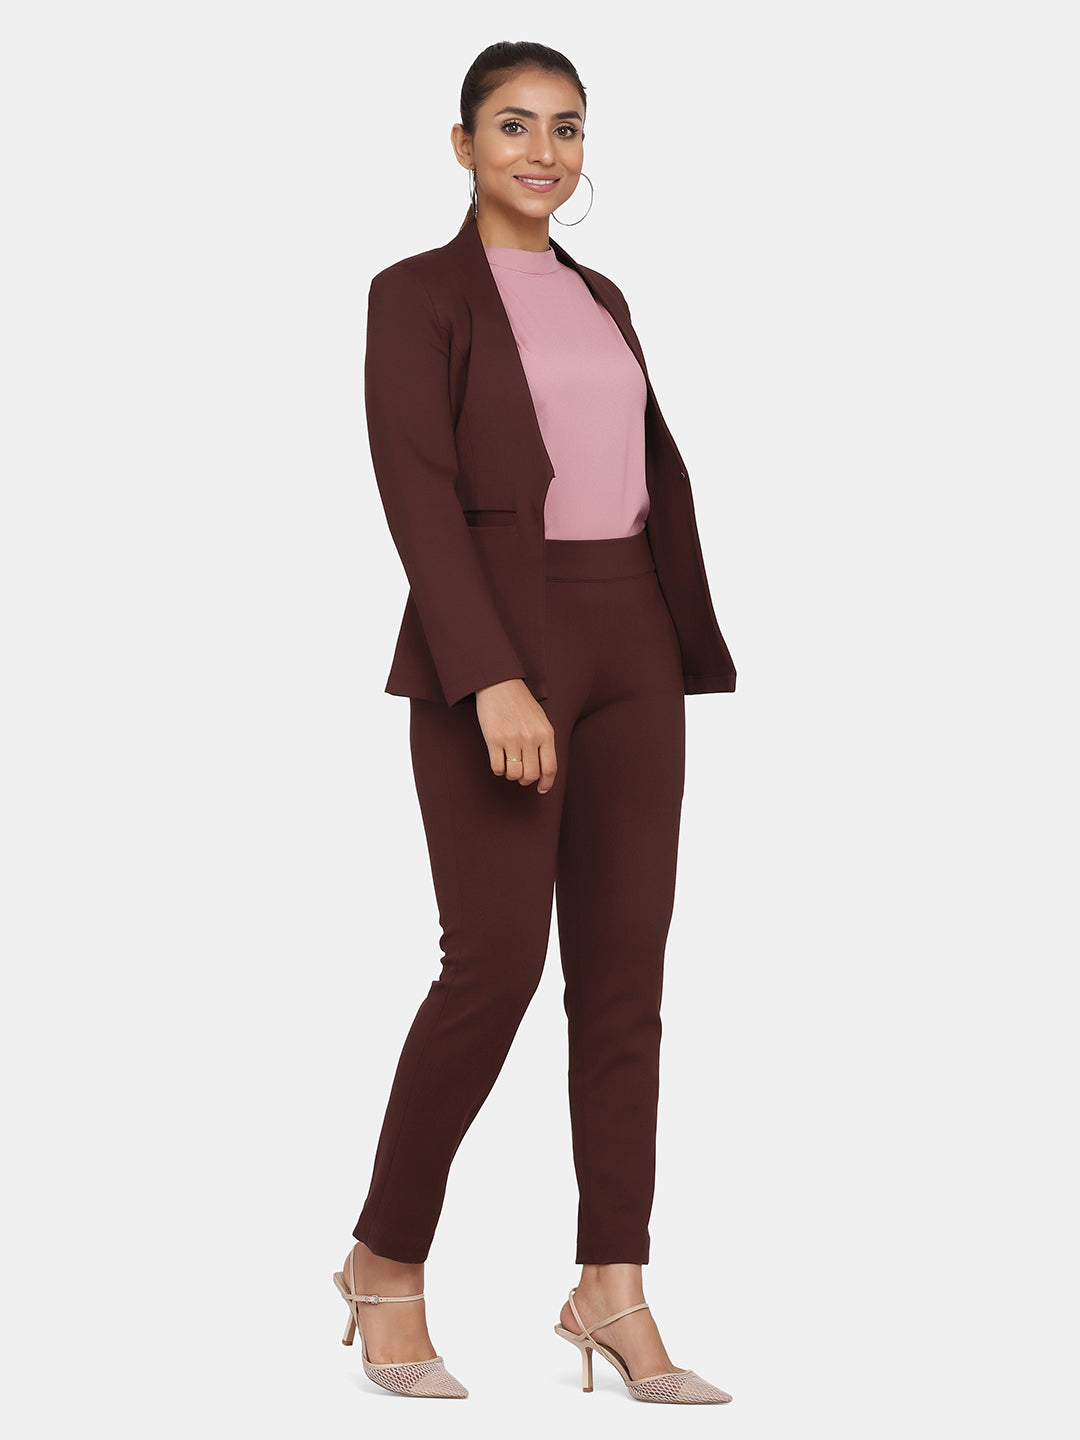 Stretch Pant Suit for Women - Chocolate Brown